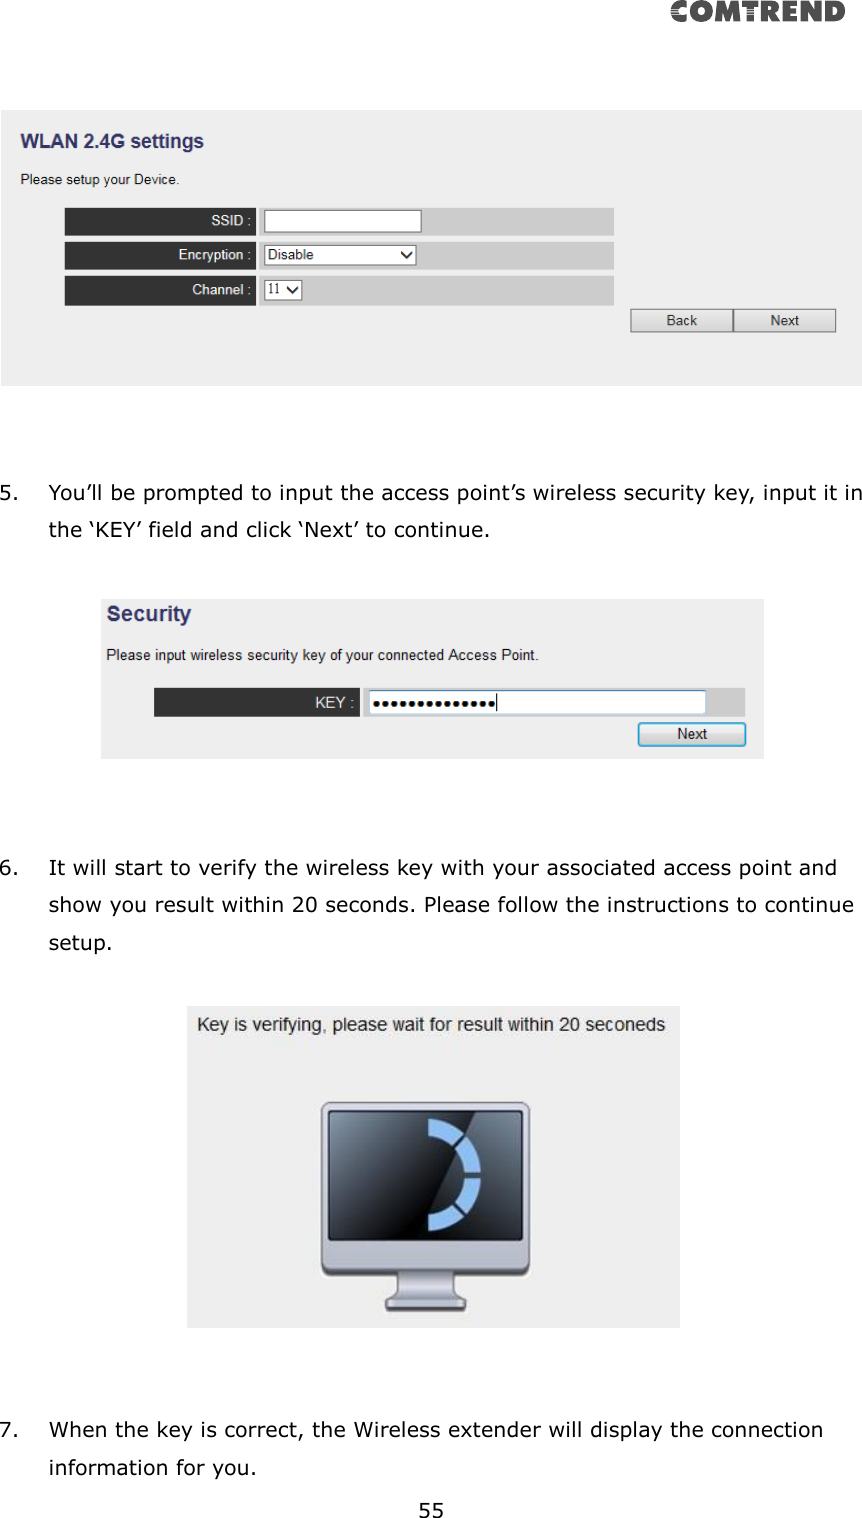       55      5. You’ll be prompted to input the access point’s wireless security key, input it in the ‘KEY’ field and click ‘Next’ to continue.     6. It will start to verify the wireless key with your associated access point and show you result within 20 seconds. Please follow the instructions to continue setup.       7. When the key is correct, the Wireless extender will display the connection information for you. 